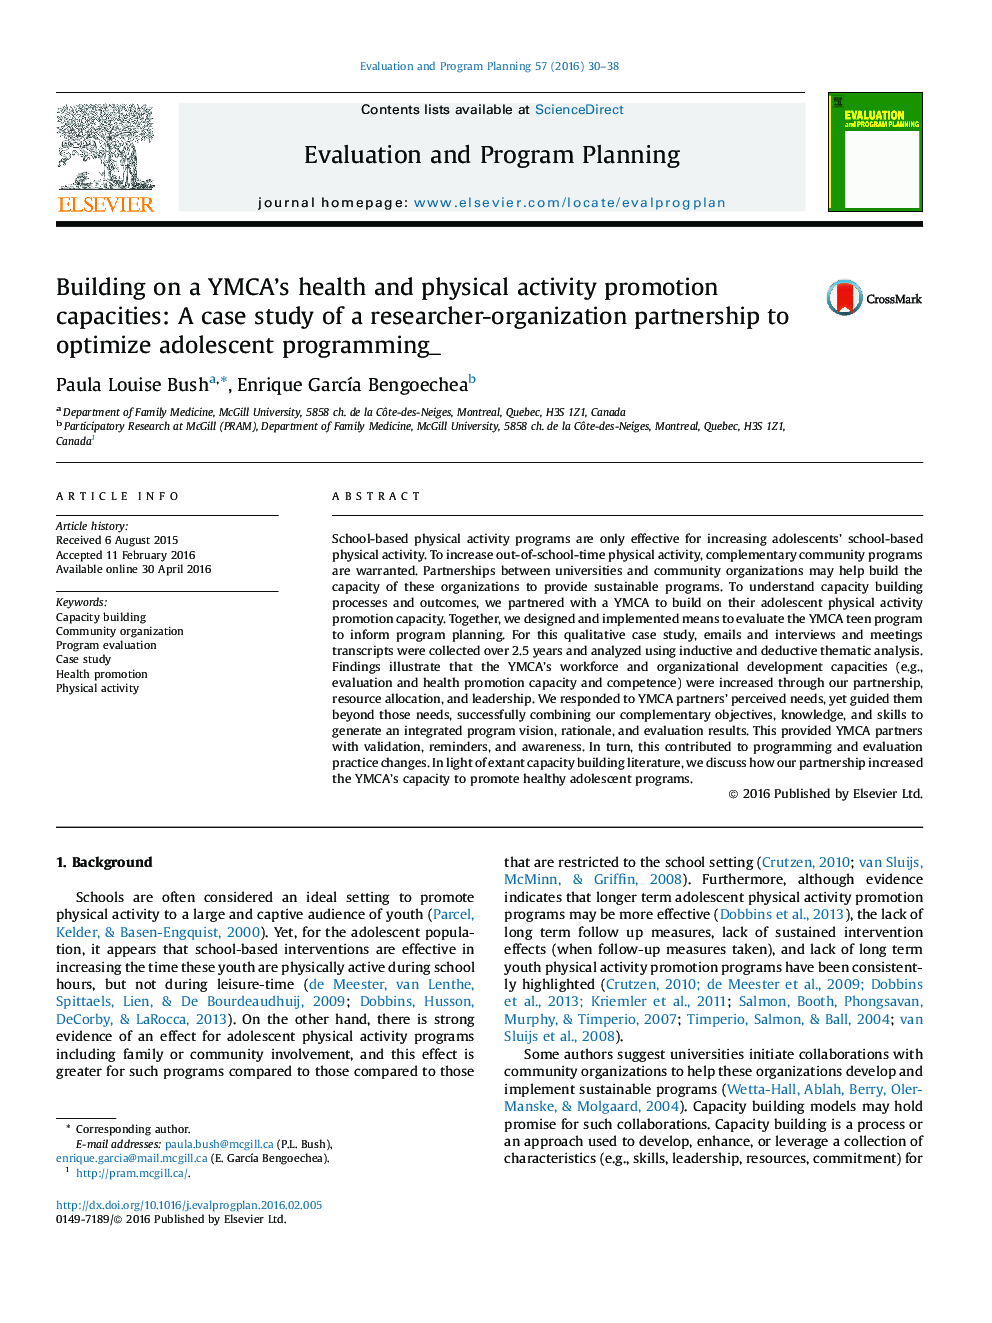 Building on a YMCA’s health and physical activity promotion capacities: A case study of a researcher-organization partnership to optimize adolescent programming_